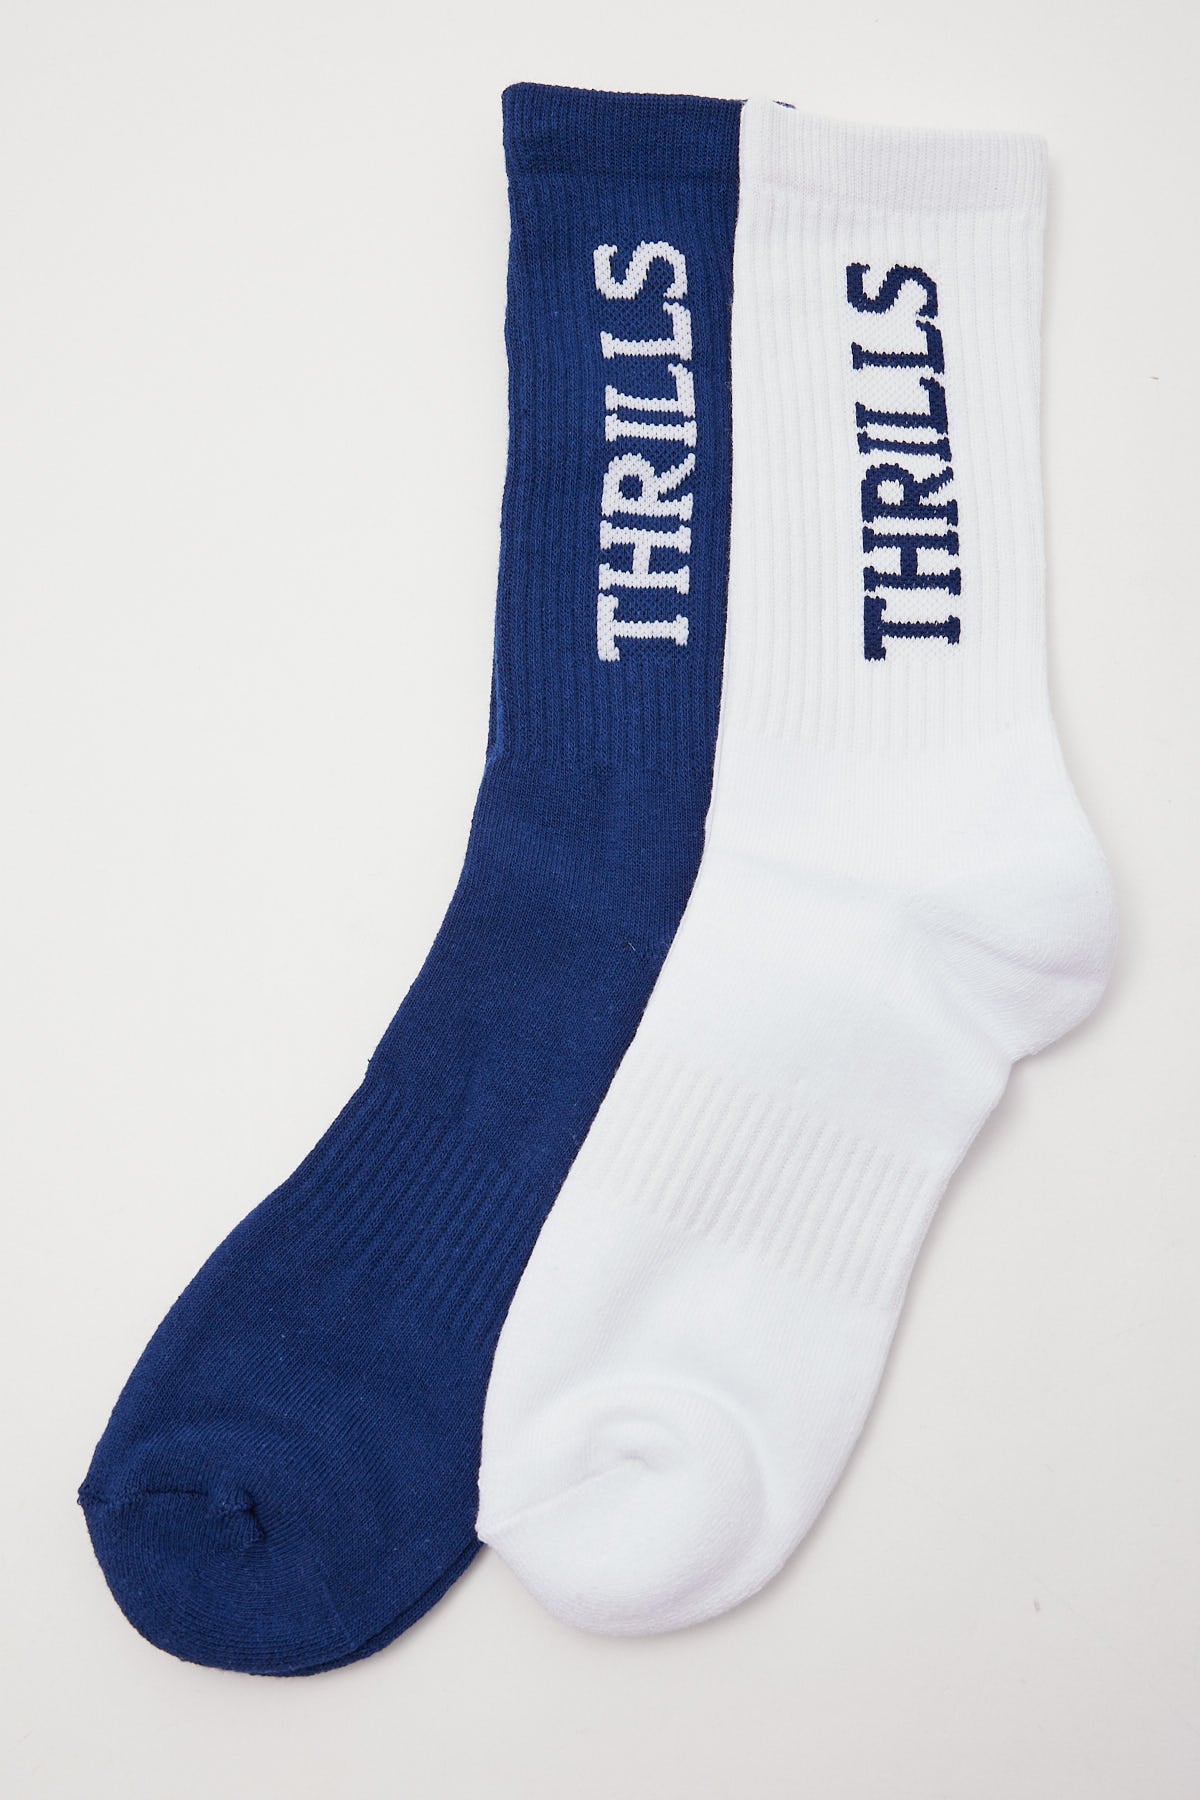 Thrills Chariot 2 Pack Sock White/Eclipse